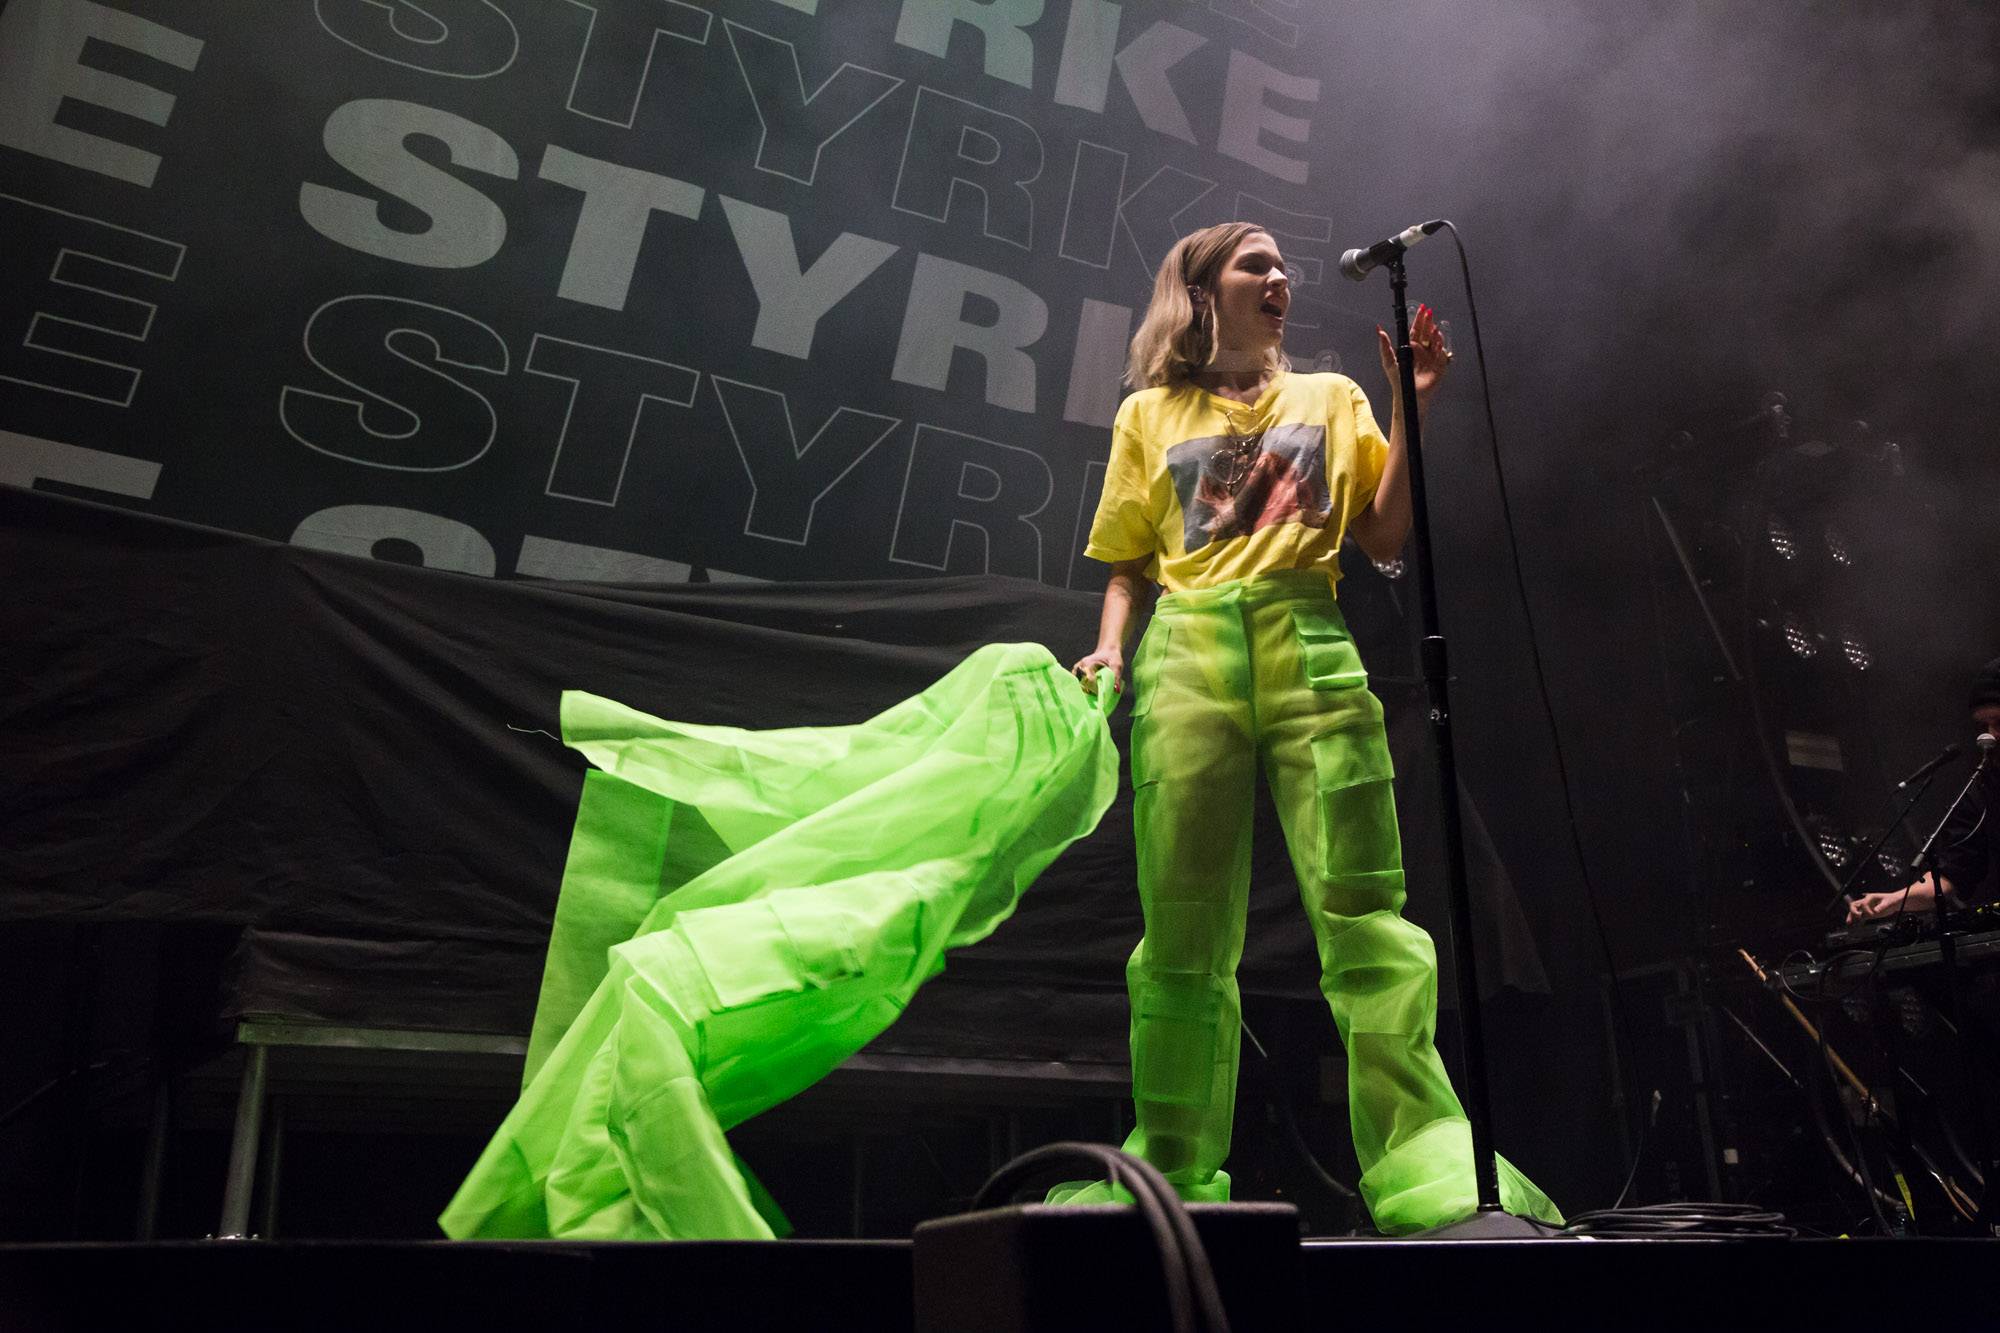 Tove Styrke at Rogers Arena, Vancouver, Mar 8 2018. Kirk Chantraine photo.